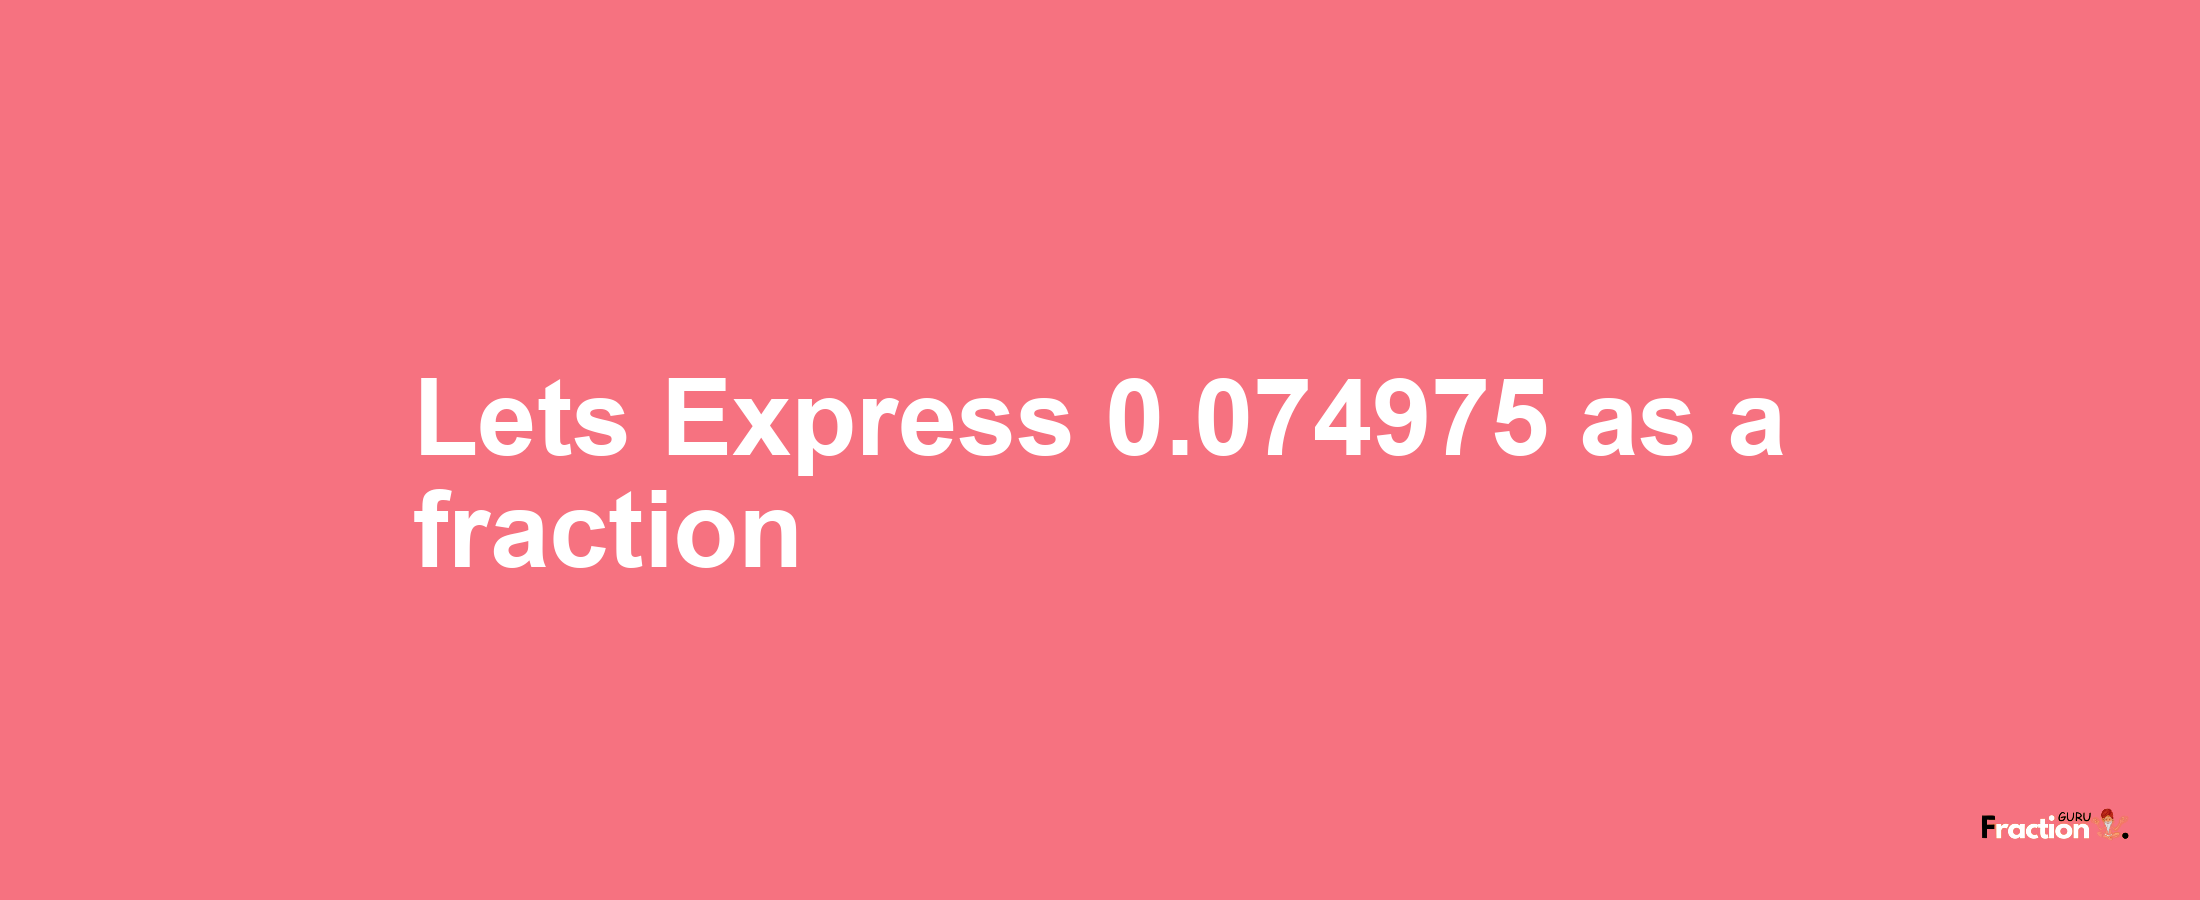 Lets Express 0.074975 as afraction